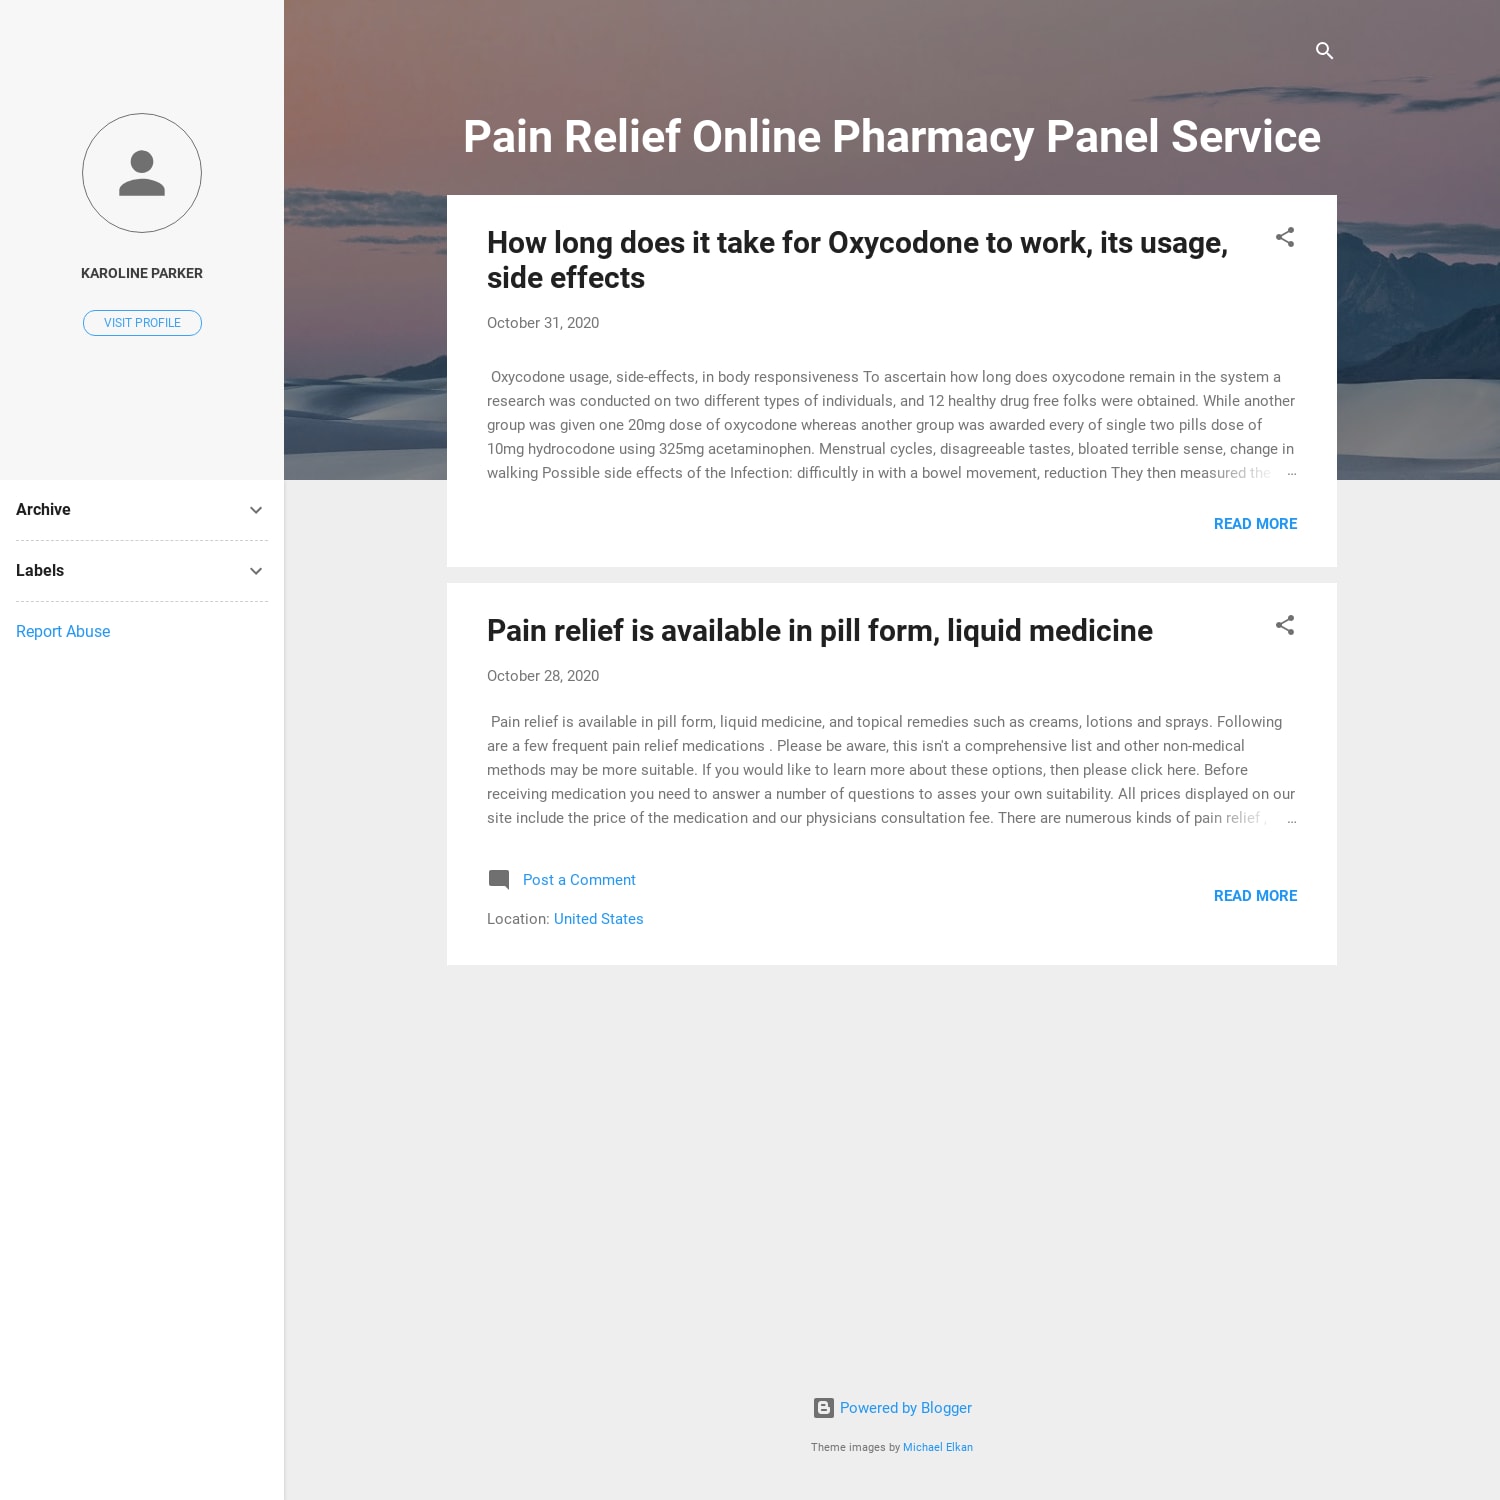 Pain Relief Online Pharmacy Panel Service